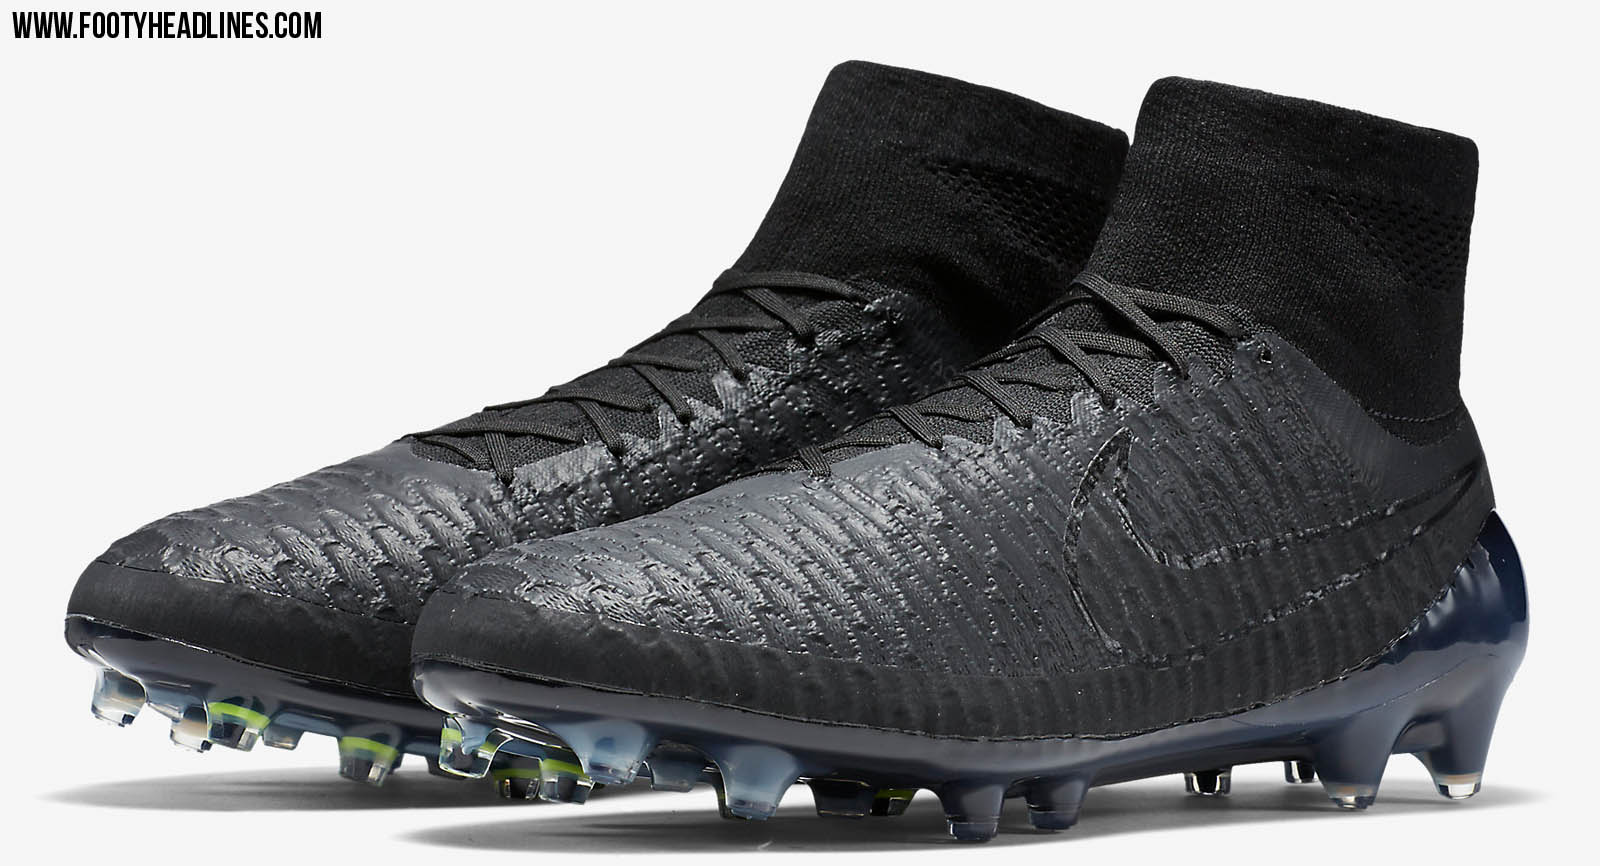 Blackout Reflective Nike Magista Obra Academy Pack Boots Released    football boot blackout kit